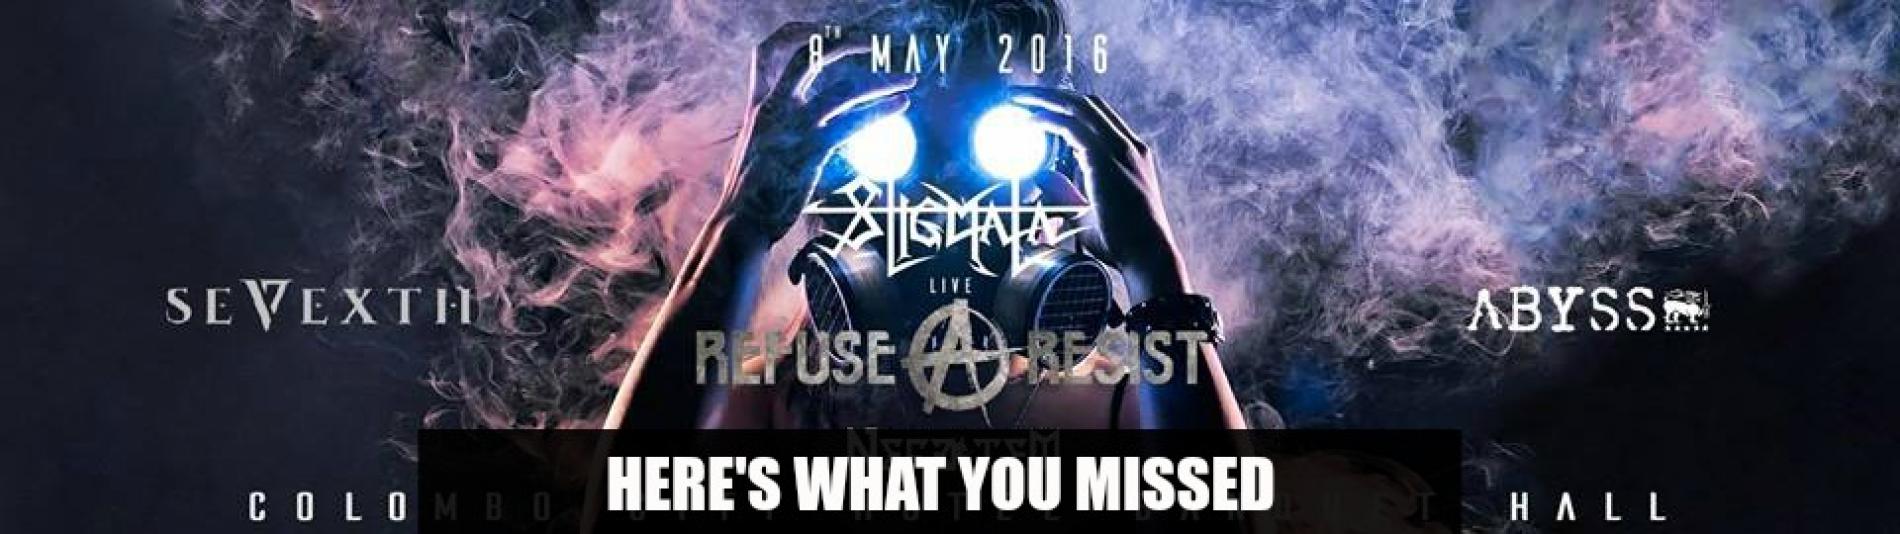 Refuse / Resist : Here’s What You Missed